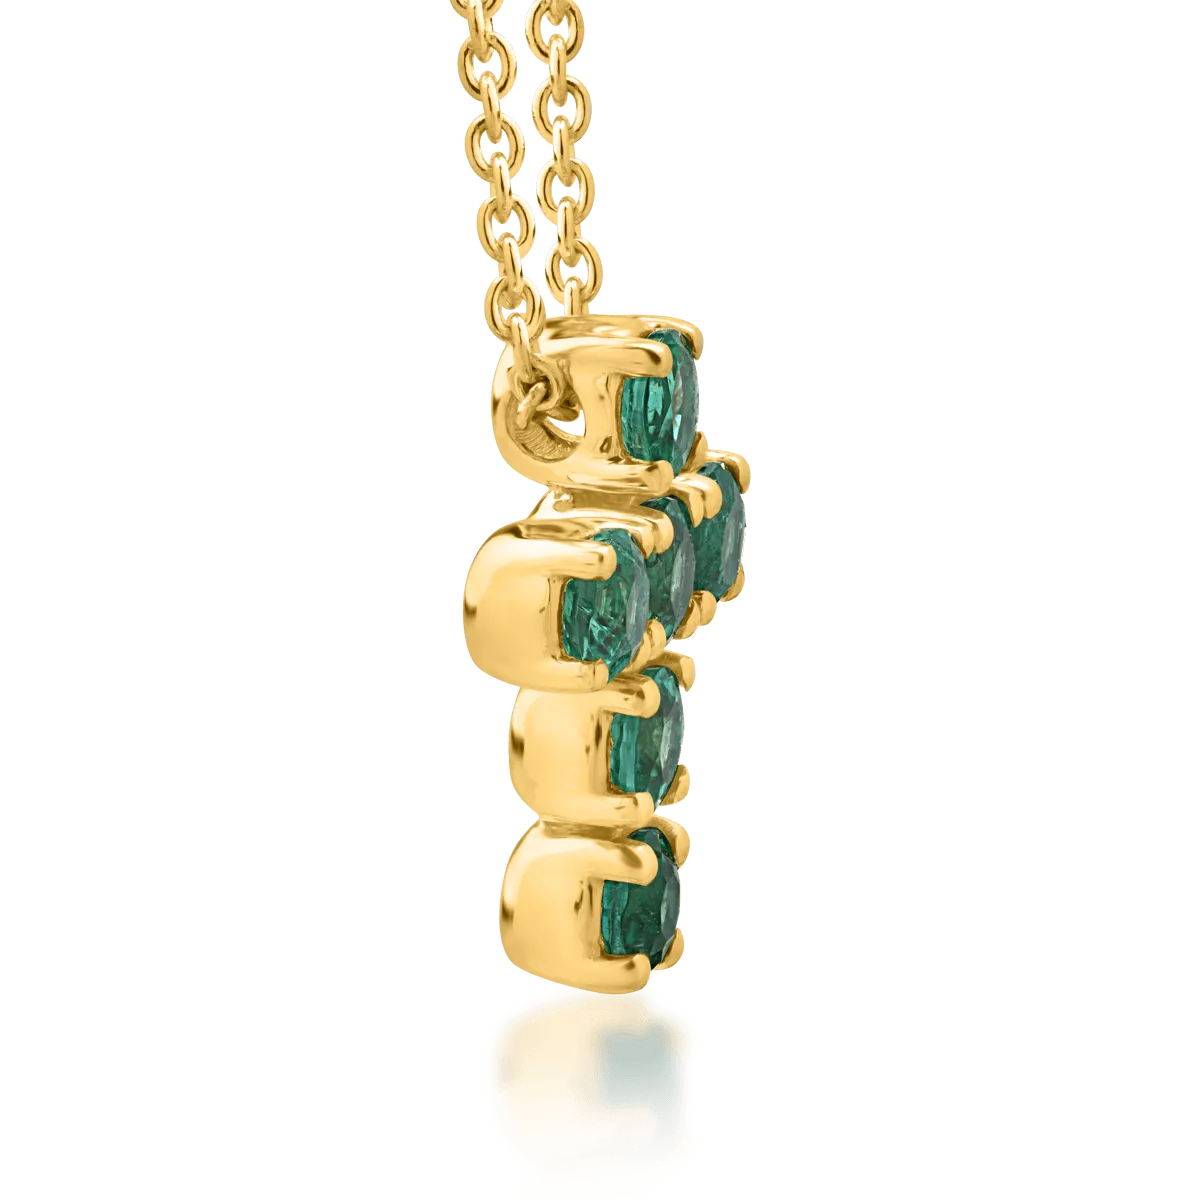 18K yellow gold cross pendant chain with 0.54ct emeralds